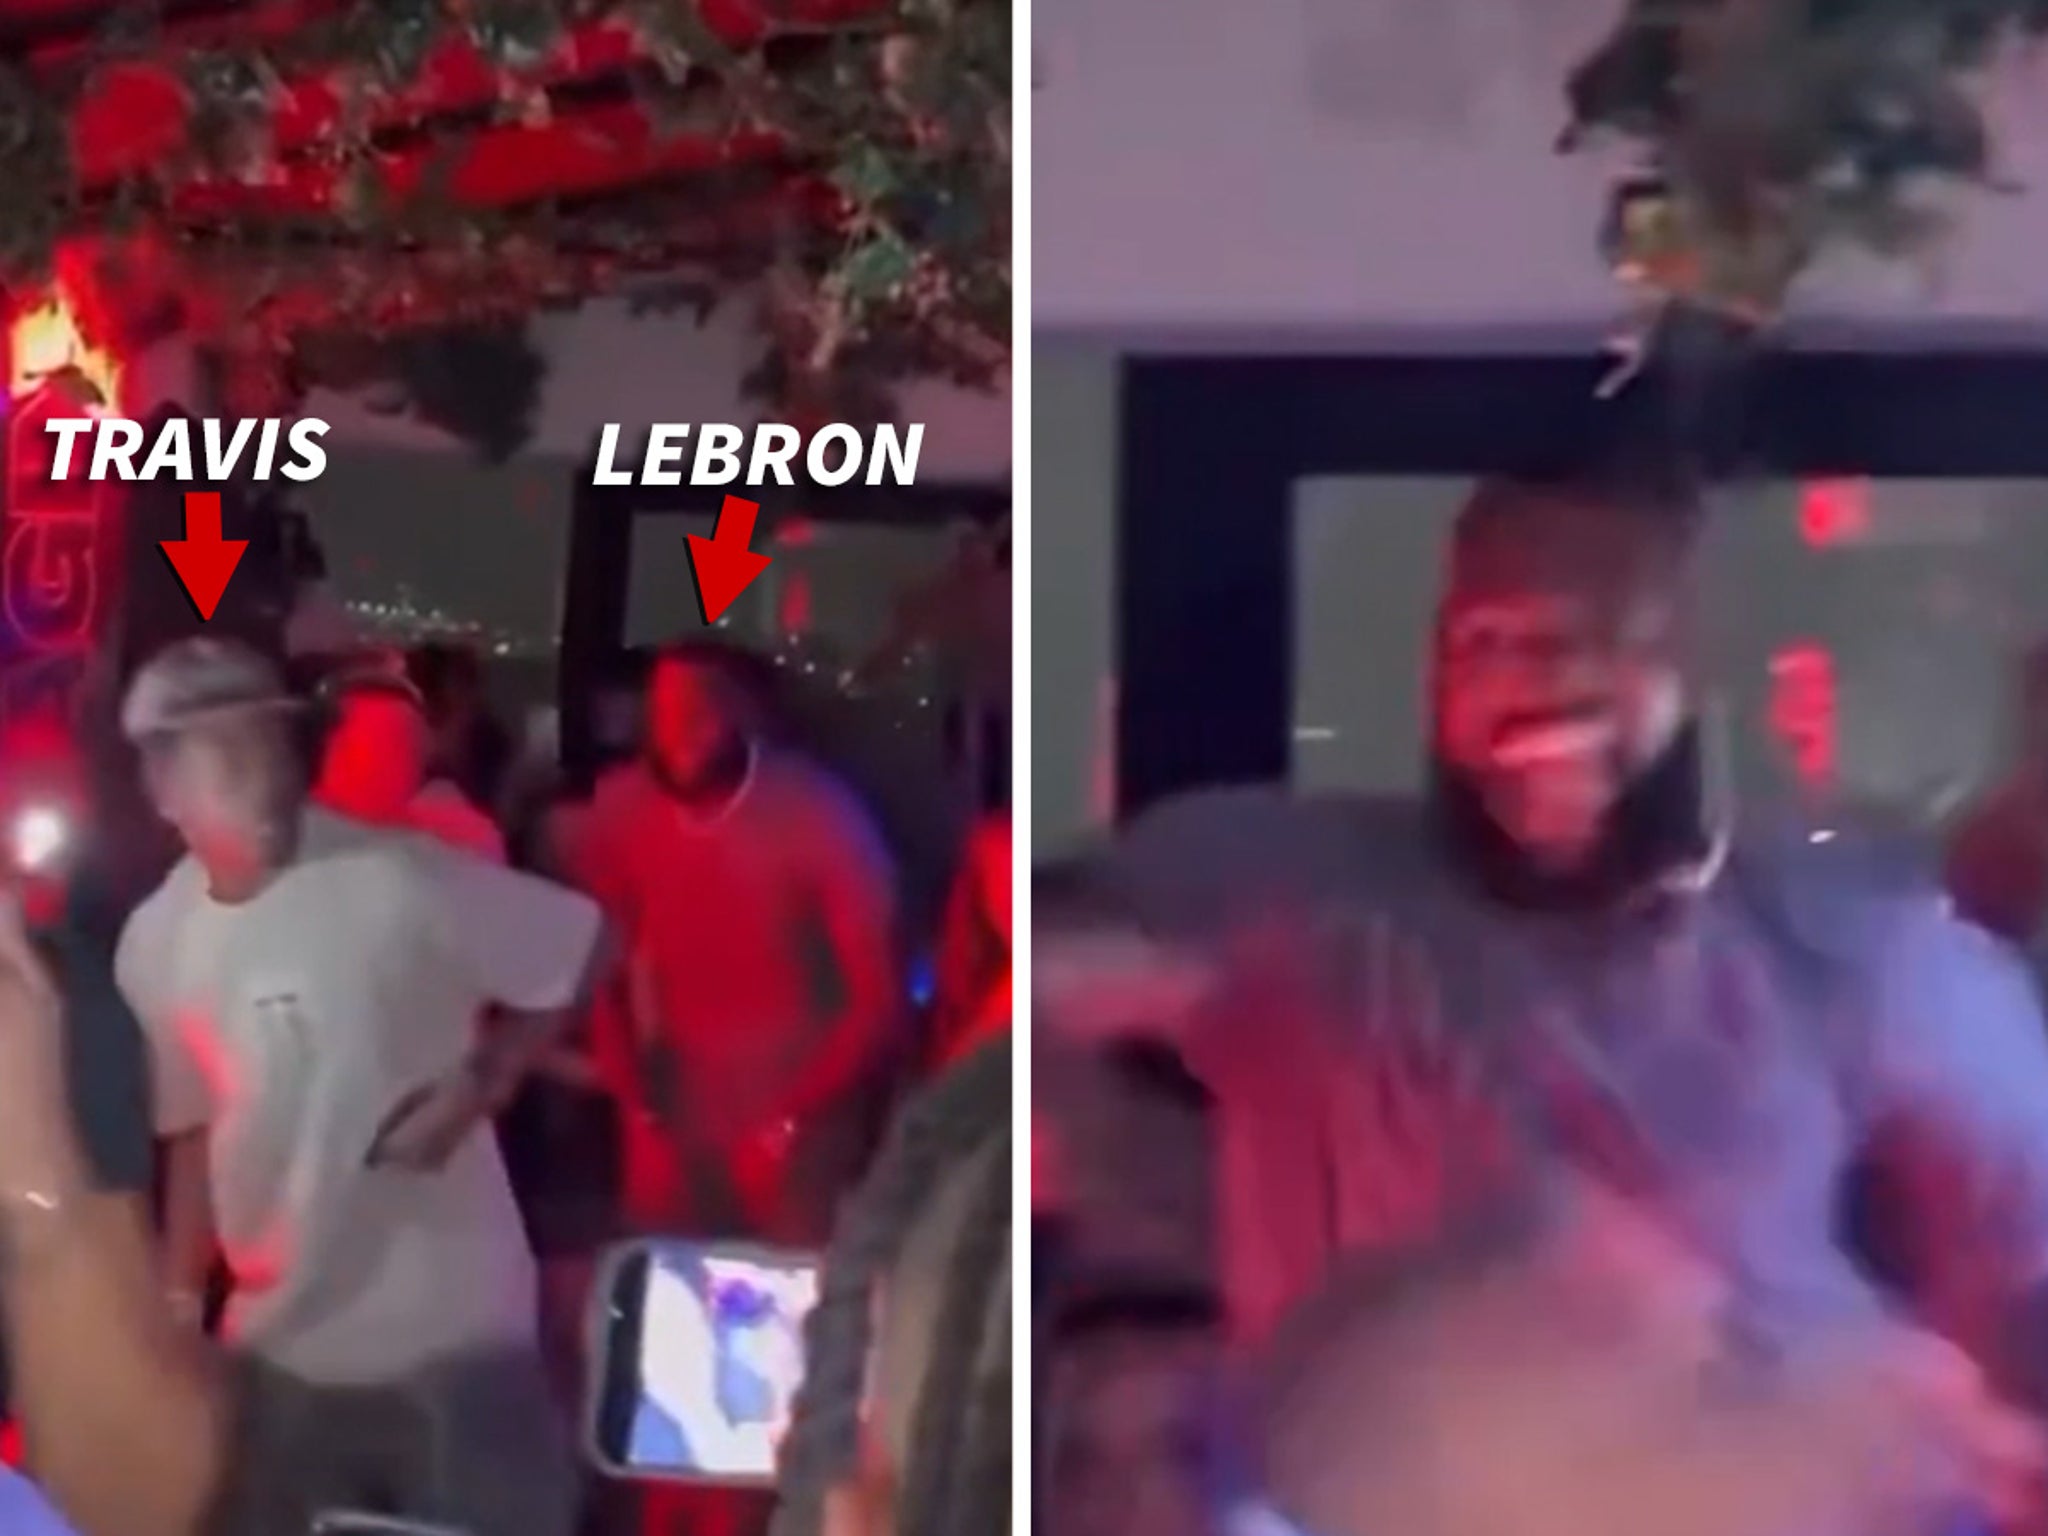 LeBron James Rages With Travis Scott At Bronny's Birthday Party